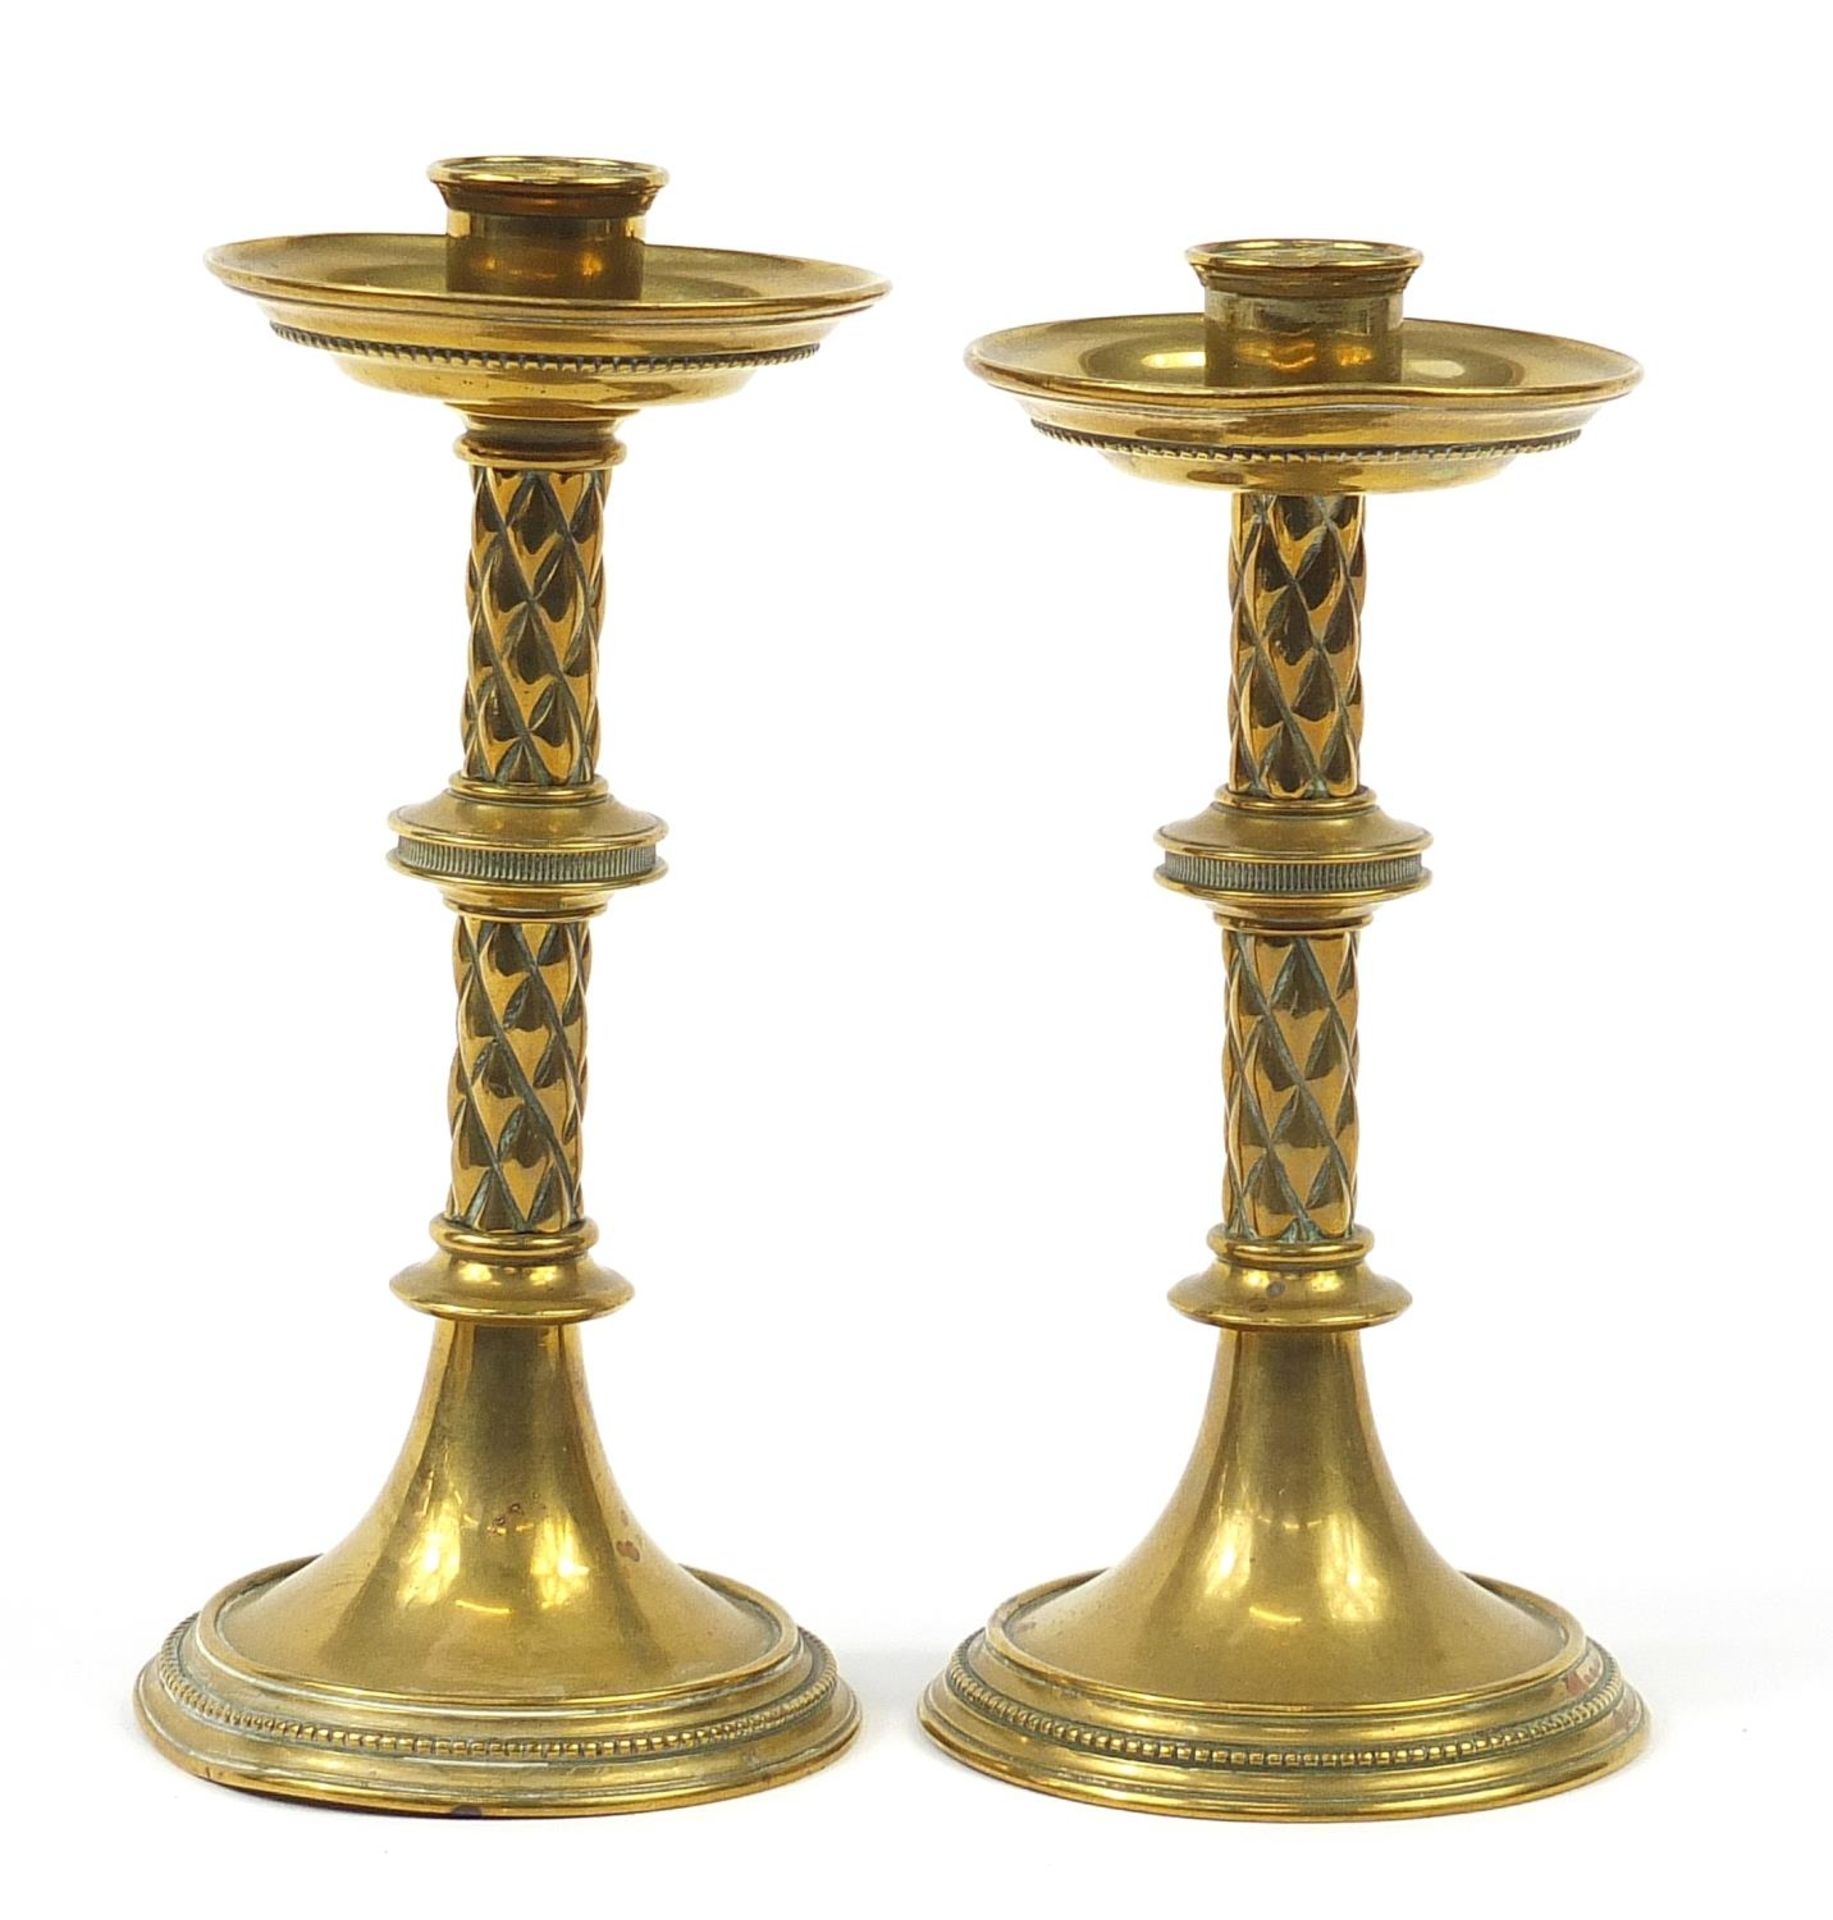 Two Arts & Crafts brass candlesticks by William Tonkin & Son, the largest 21.5cm high - Image 2 of 3